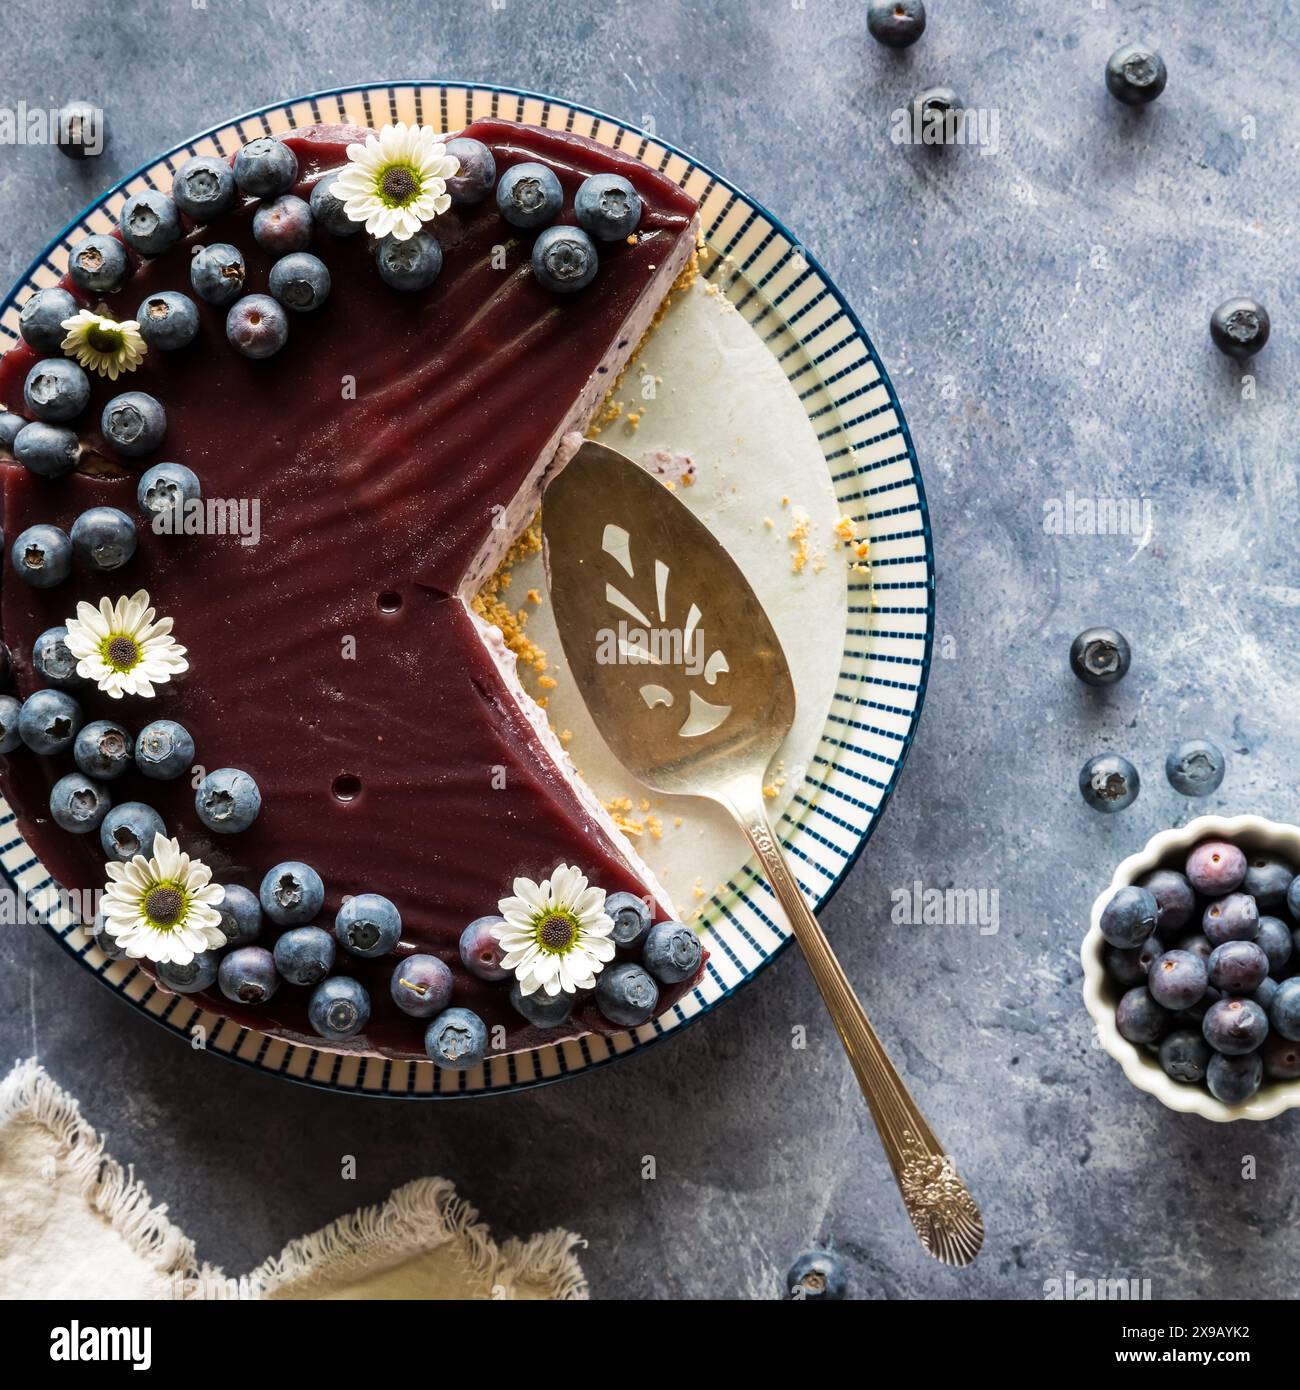 A homemade blueberry cheesecake garnished with blueberries and slices removed. Stock Photo